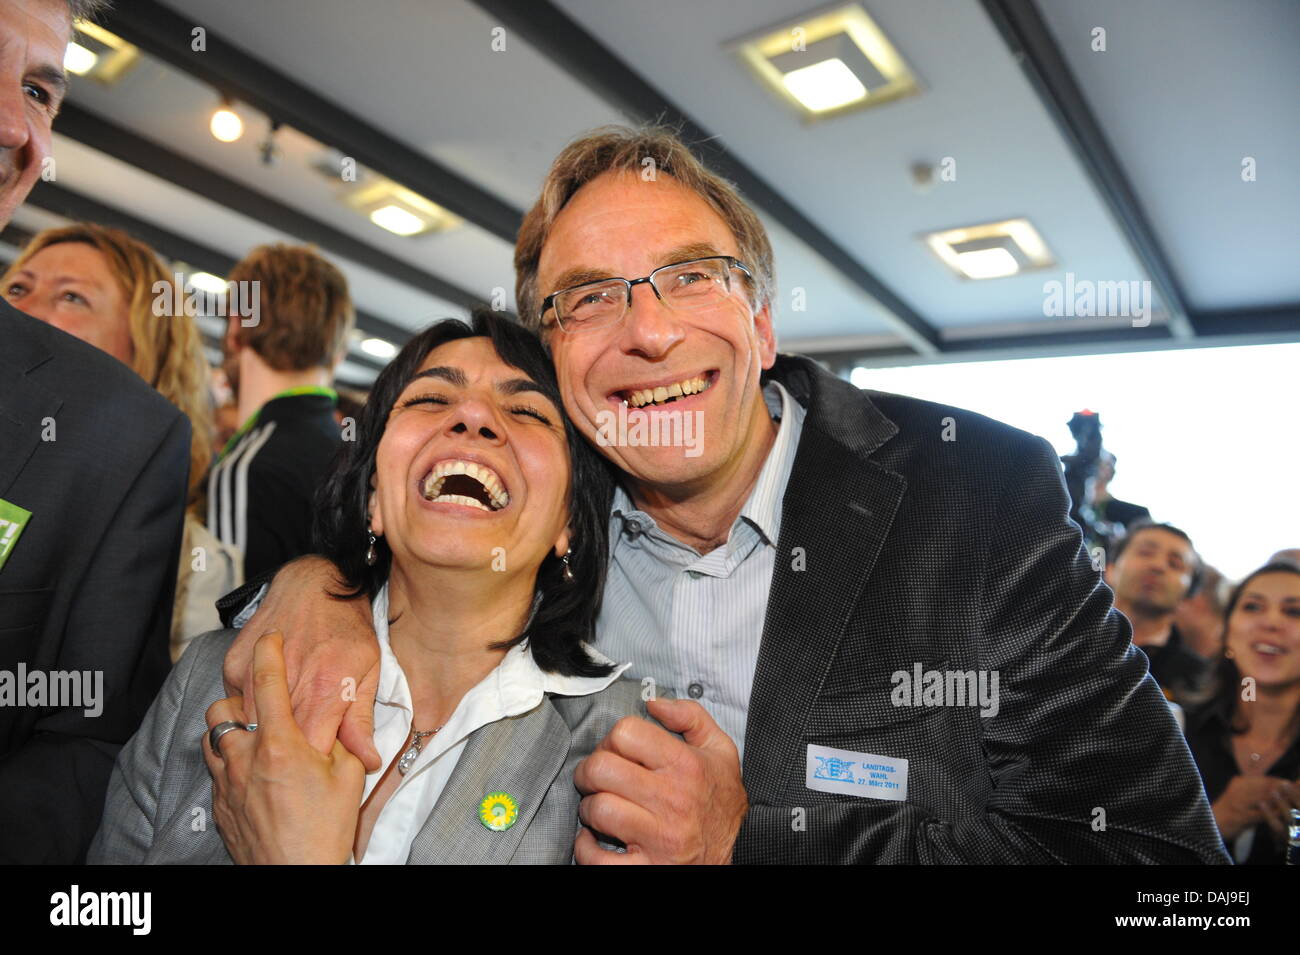 The picture shows supporters of the Green Party  celebrating after the first prognosis at the Landtag election in the state of Baden-Württemberg at the Landtag in Stuttgart, Germany on 27 March 2011. At the Landtag elections in Baden-Württember 7,8 million citizens are eligible to vote. 19 Parties with 684 candidates and 6 independent candidates have entered the elections. PHOTO: U Stock Photo